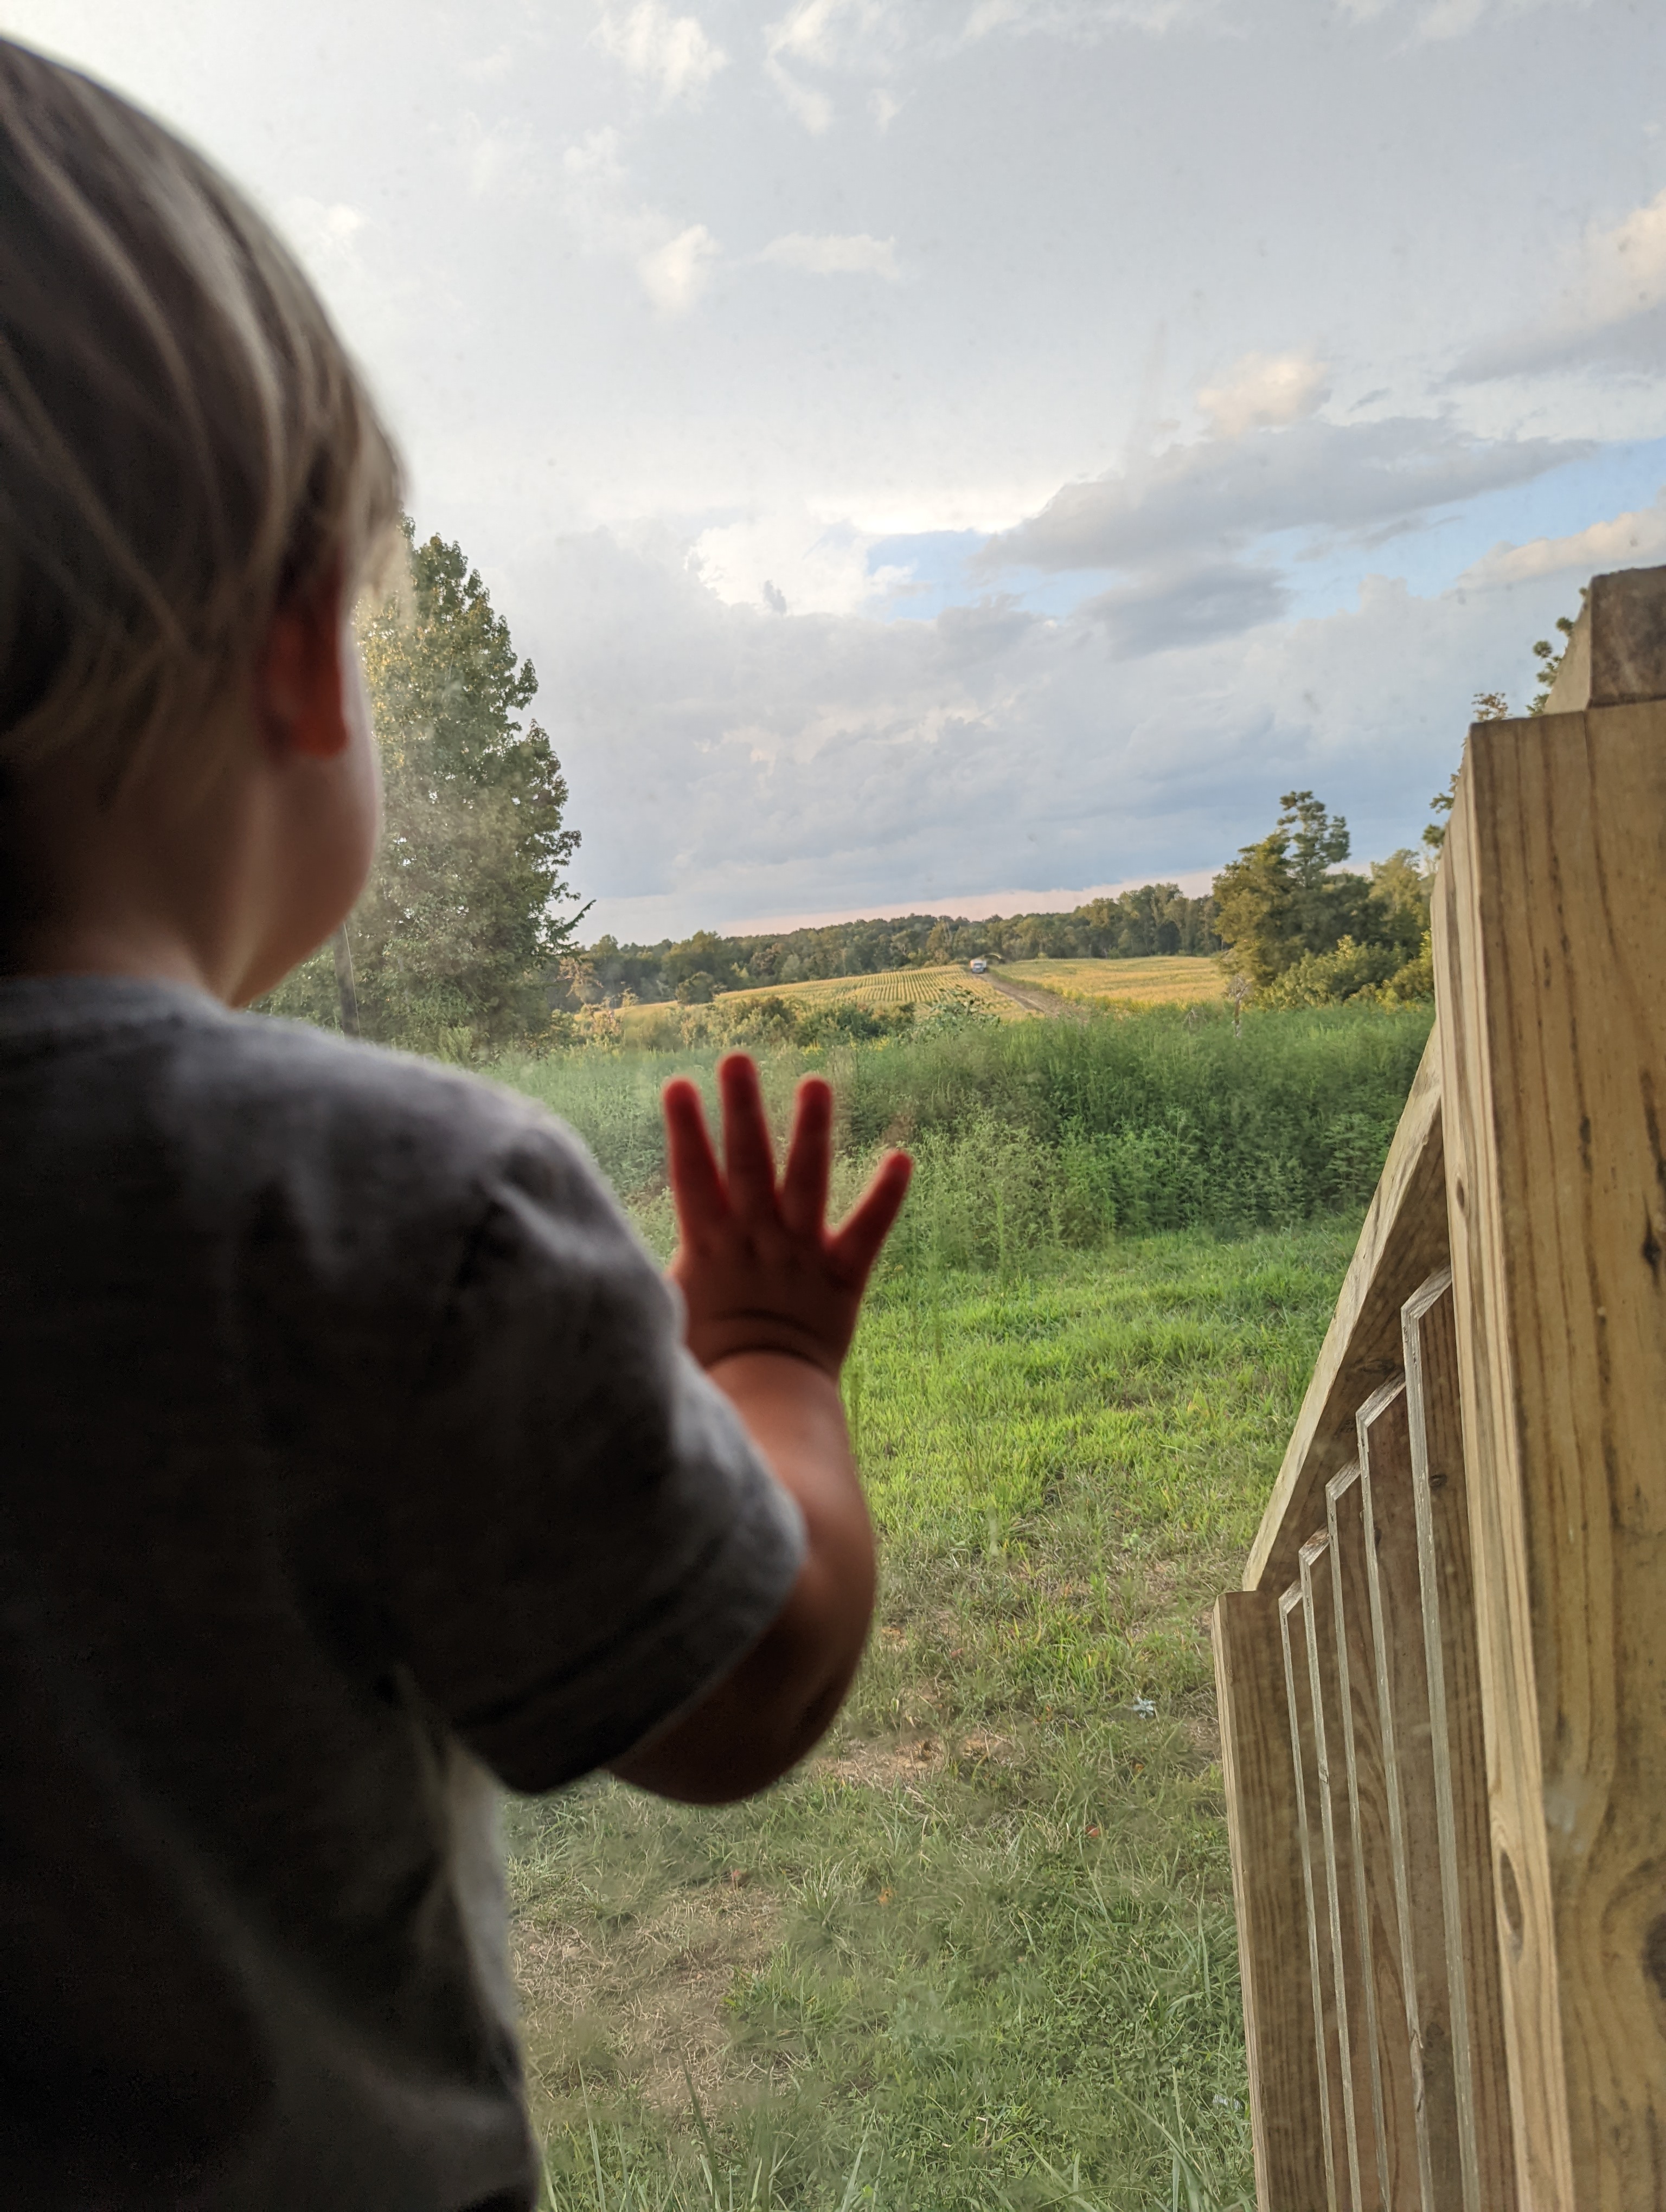 Noah loves the view, he can eve watch the tractor go by during planting or harvesting